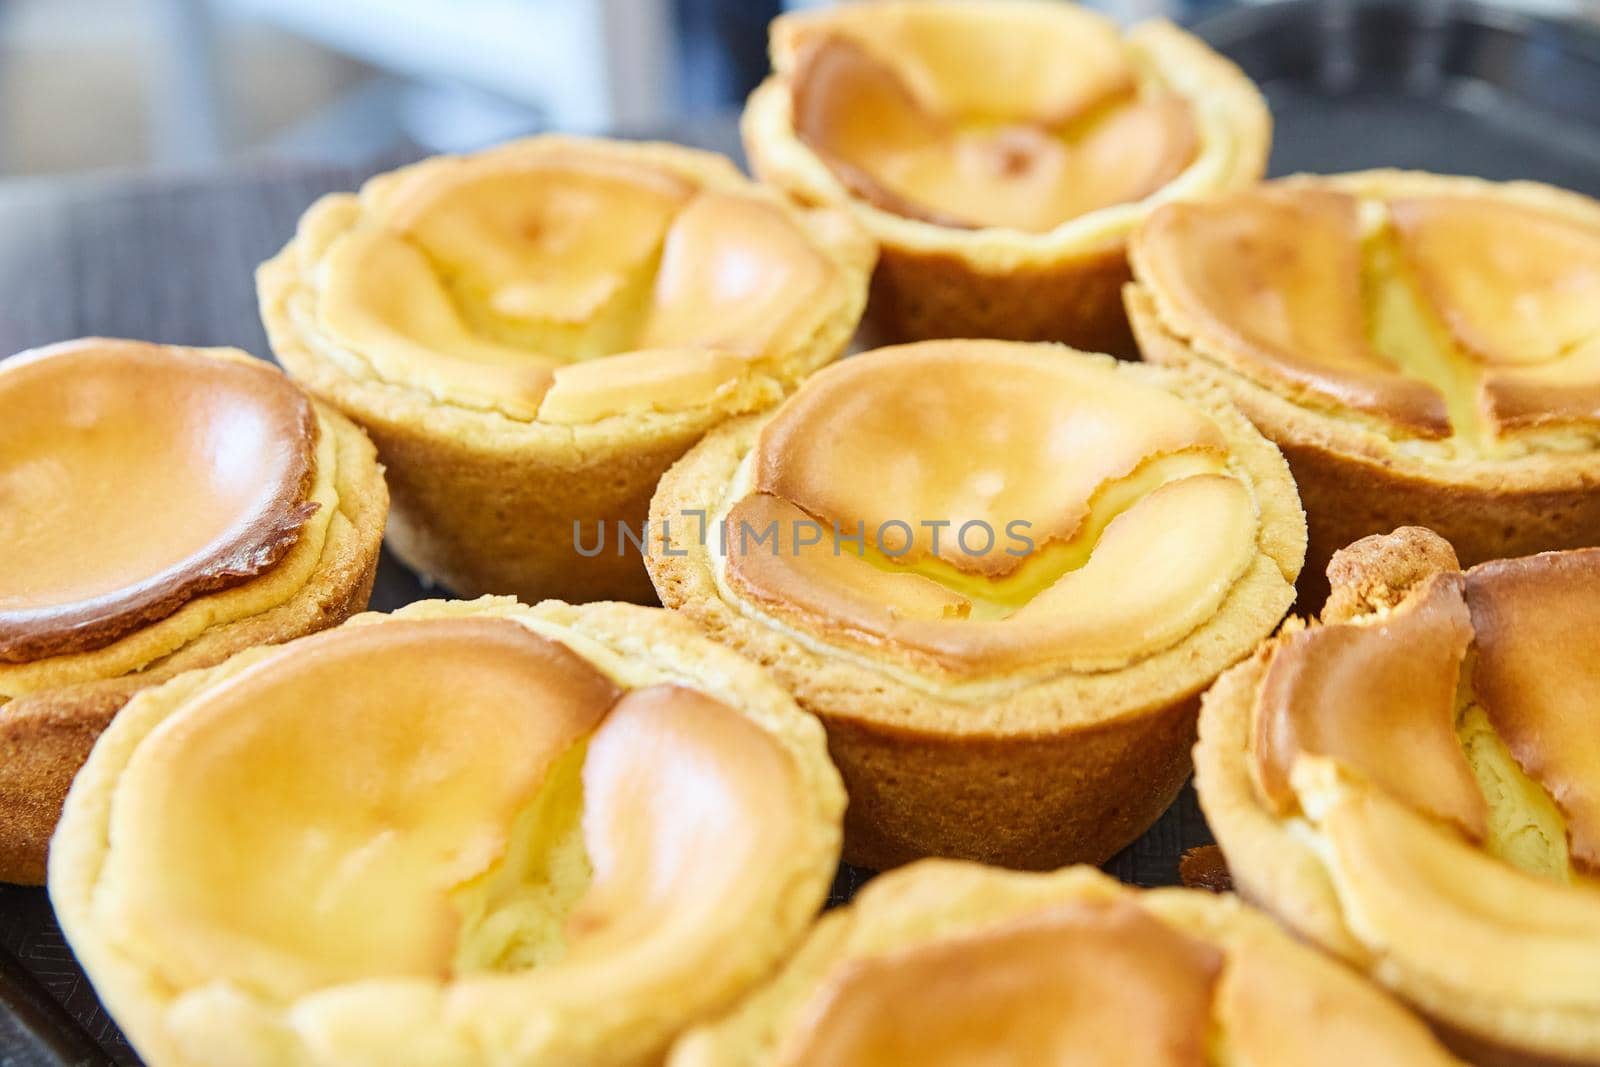 Image of Puff Pastry and custard pastries from local bakery